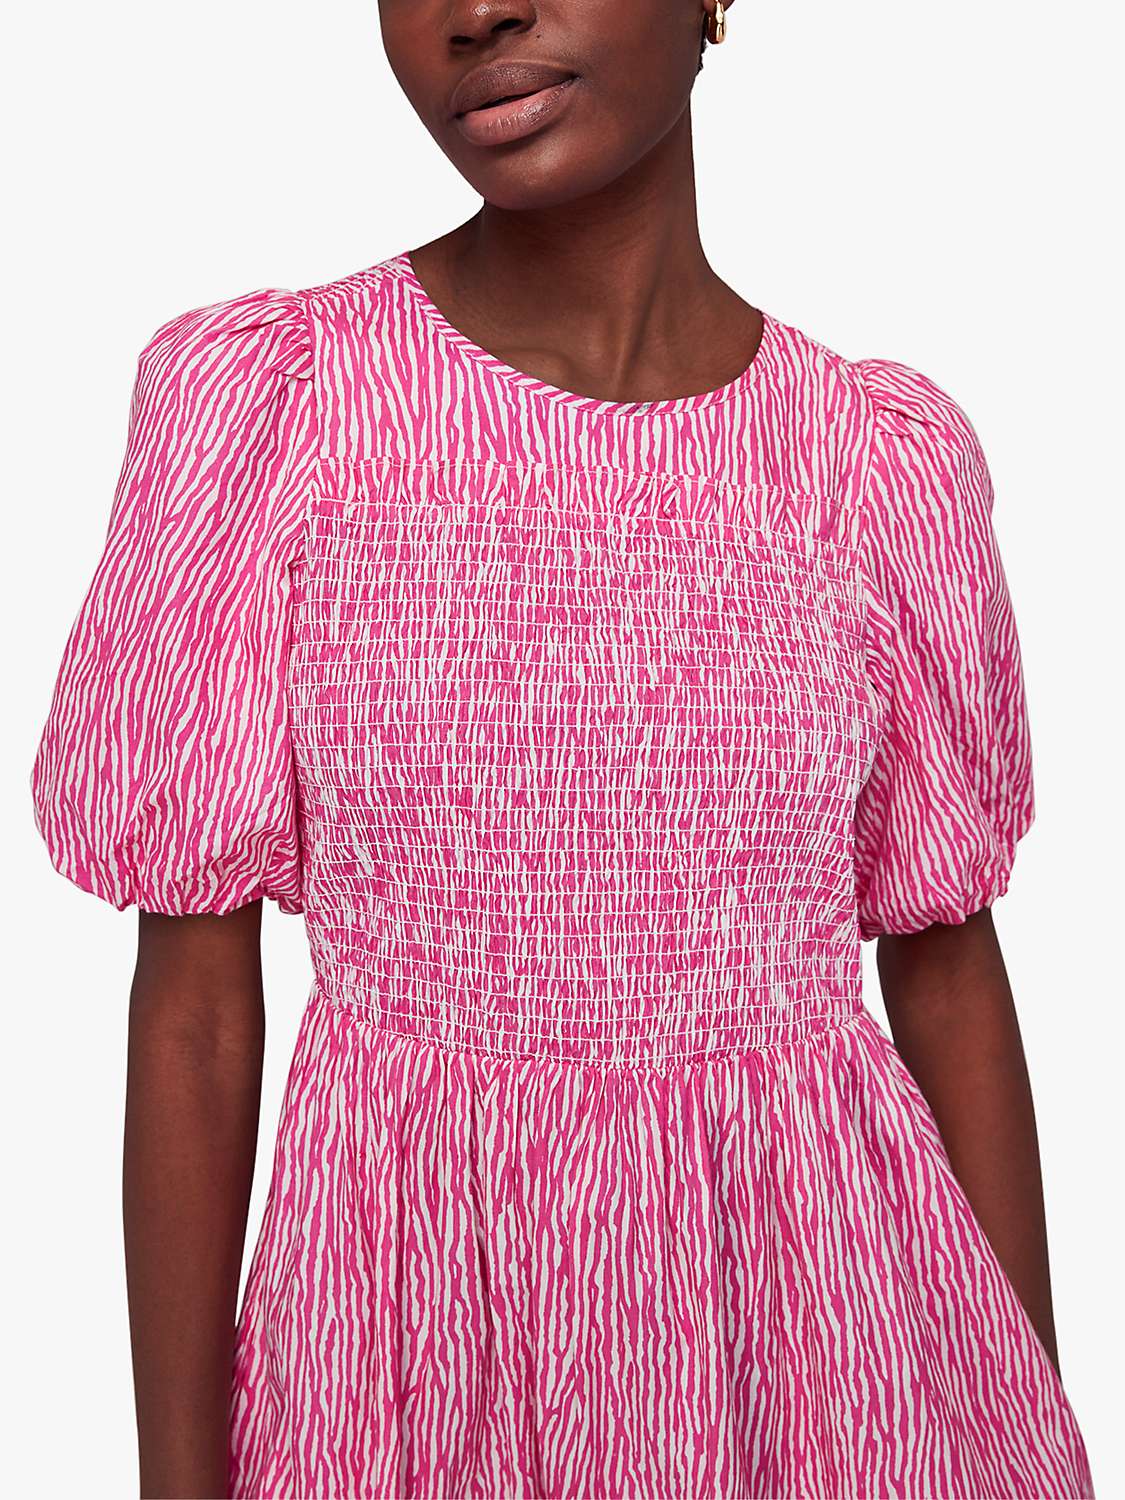 Buy Whistles Uneven Lines Midi Dress, Pink Online at johnlewis.com